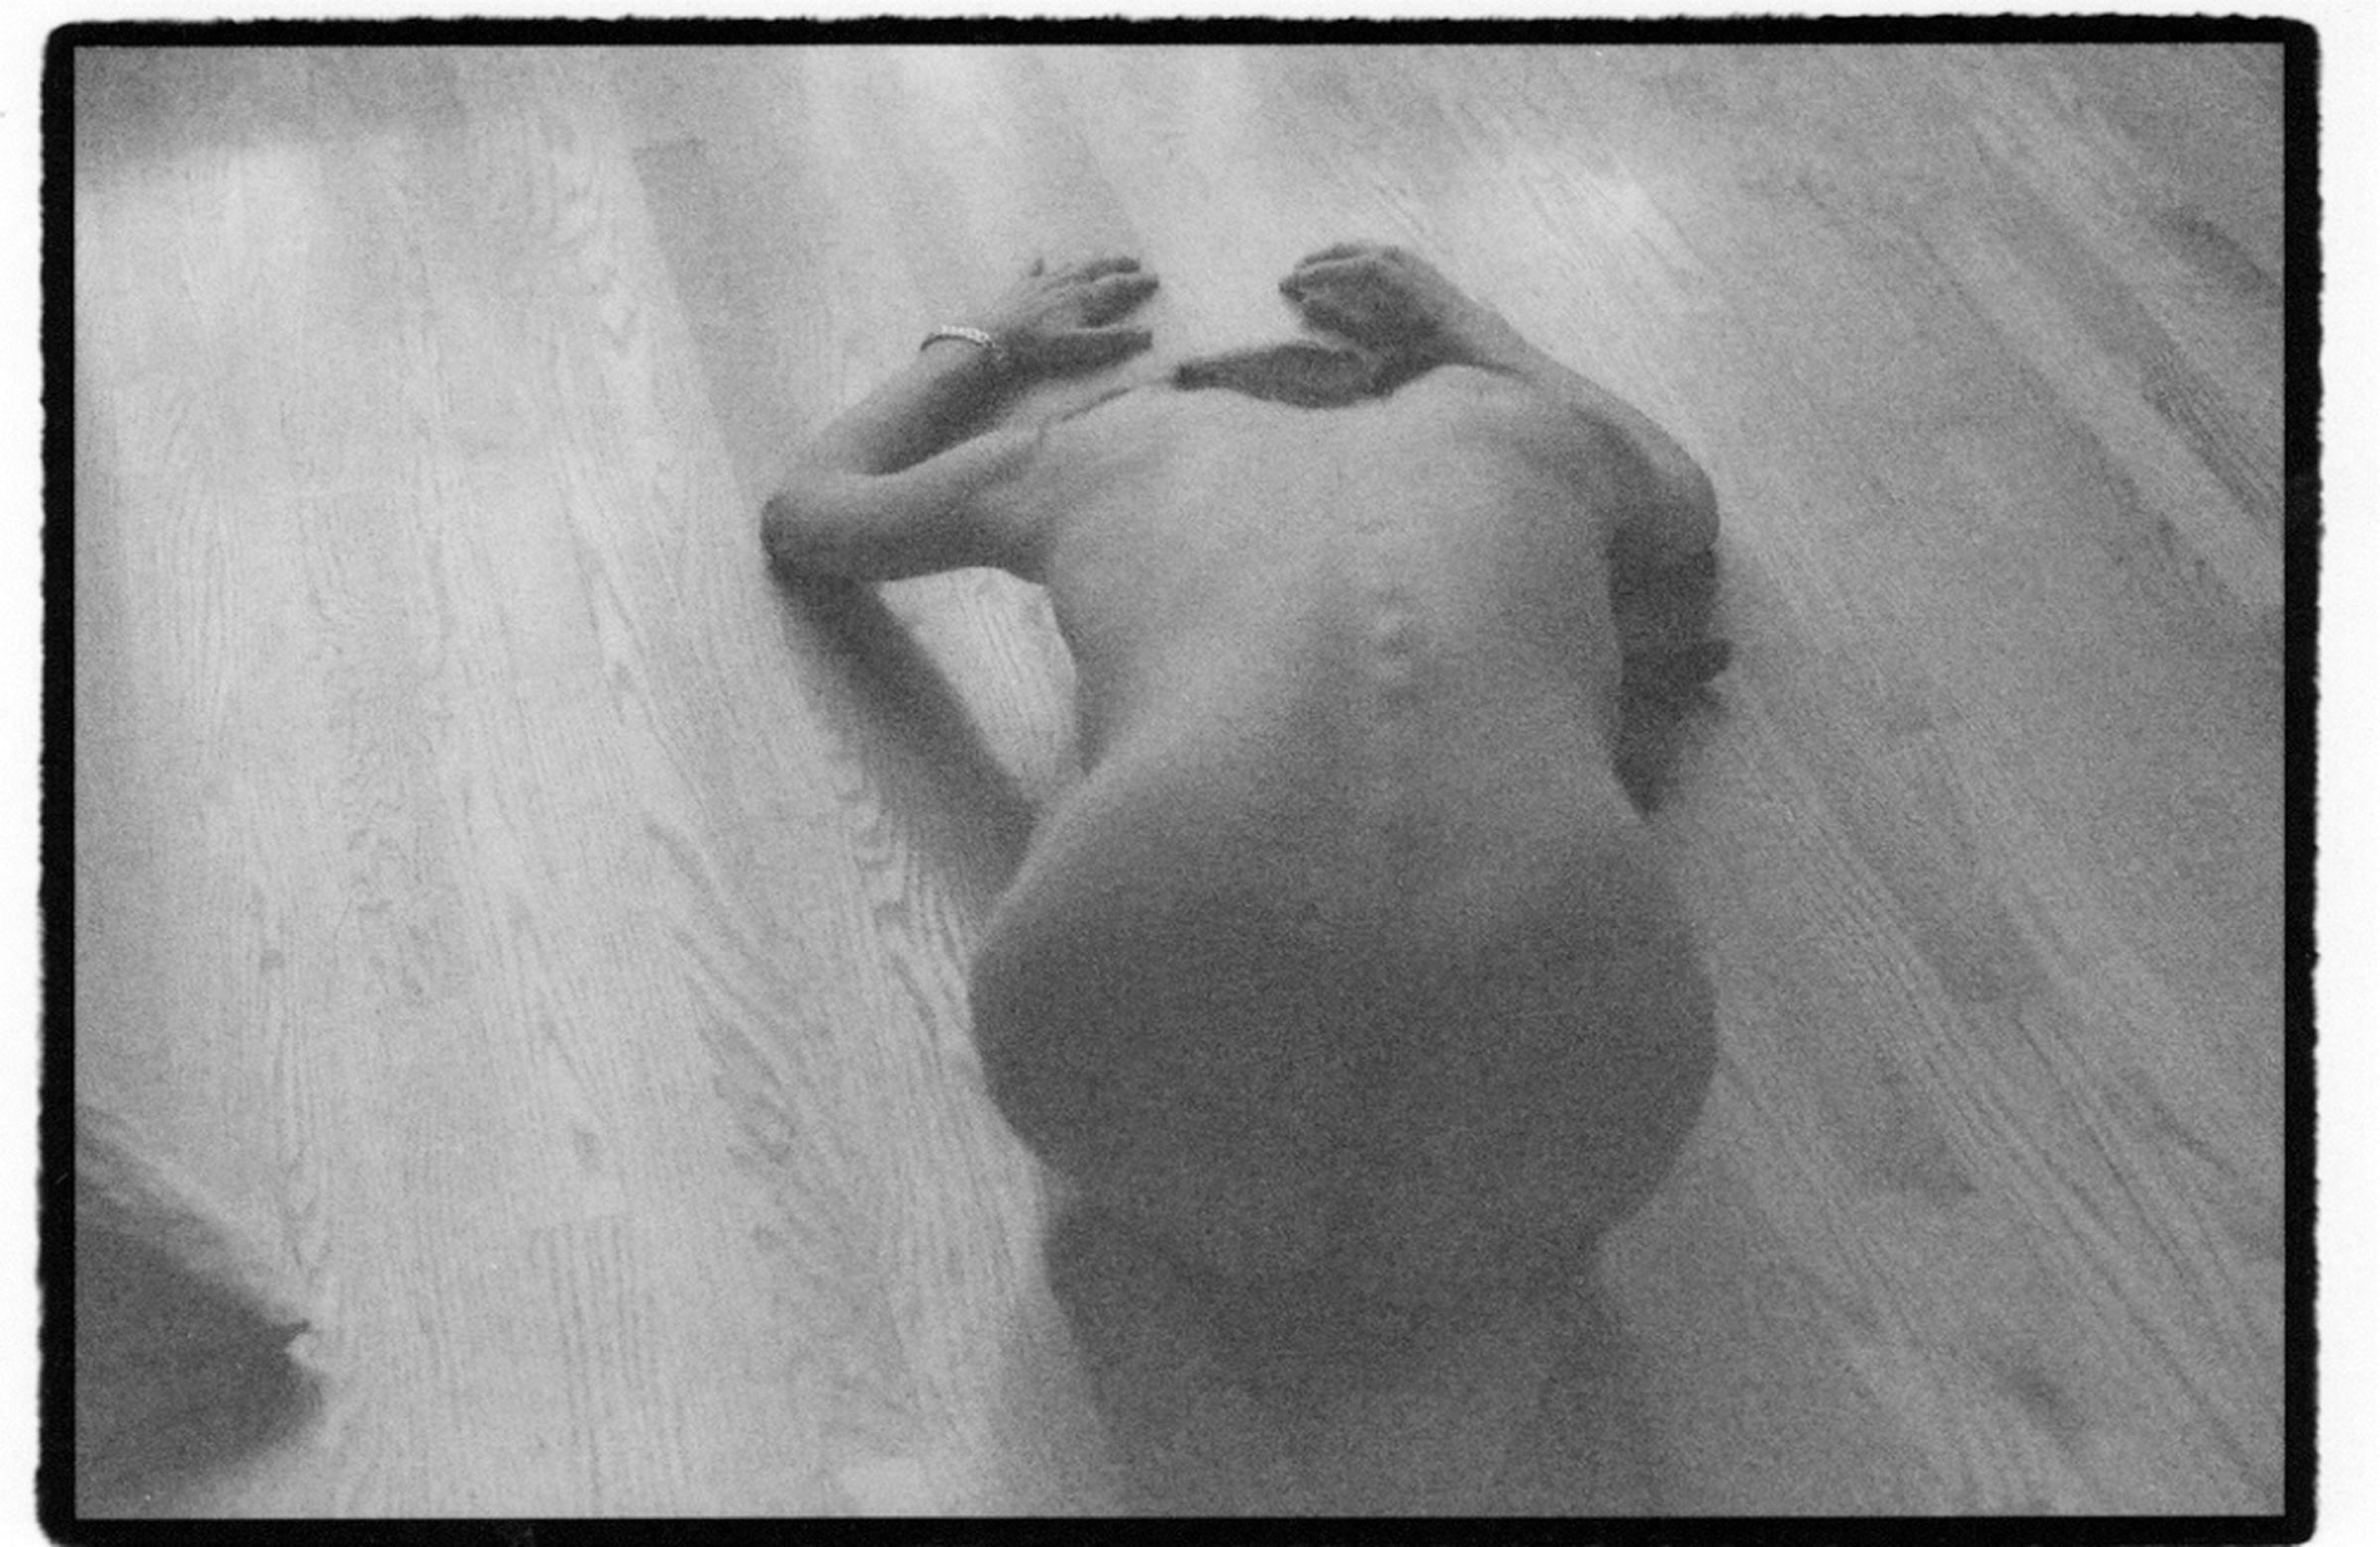 Prints - Pain and Loneliness 5 : 11” x 14” Silver Gelatin